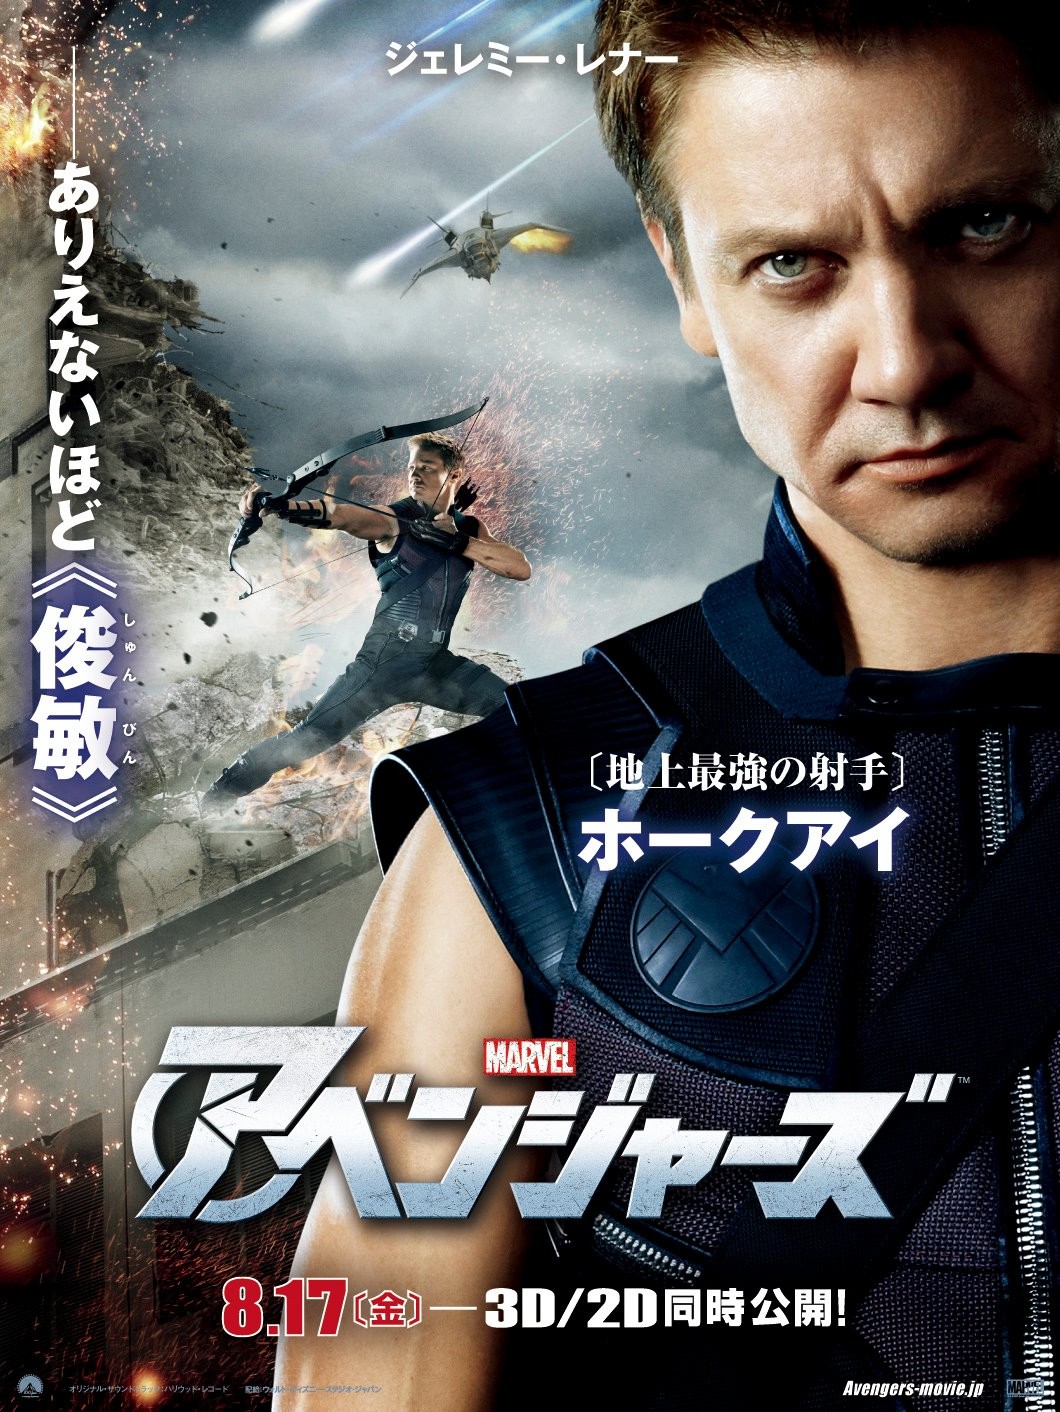 Extra Large Movie Poster Image for The Avengers (#31 of 35)